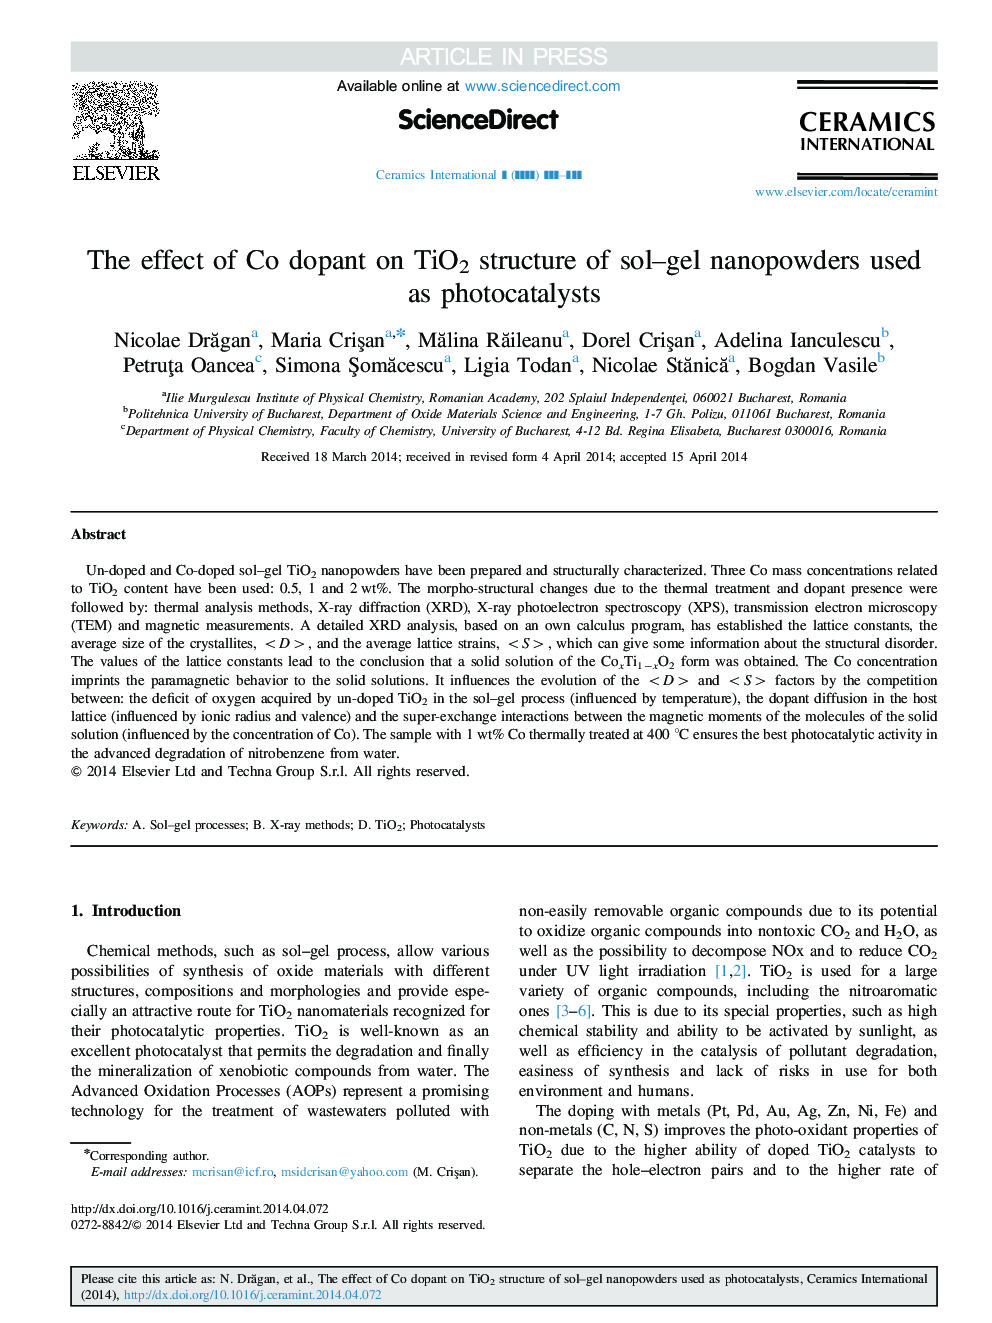 The effect of Co dopant on TiO2 structure of sol-gel nanopowders used as photocatalysts